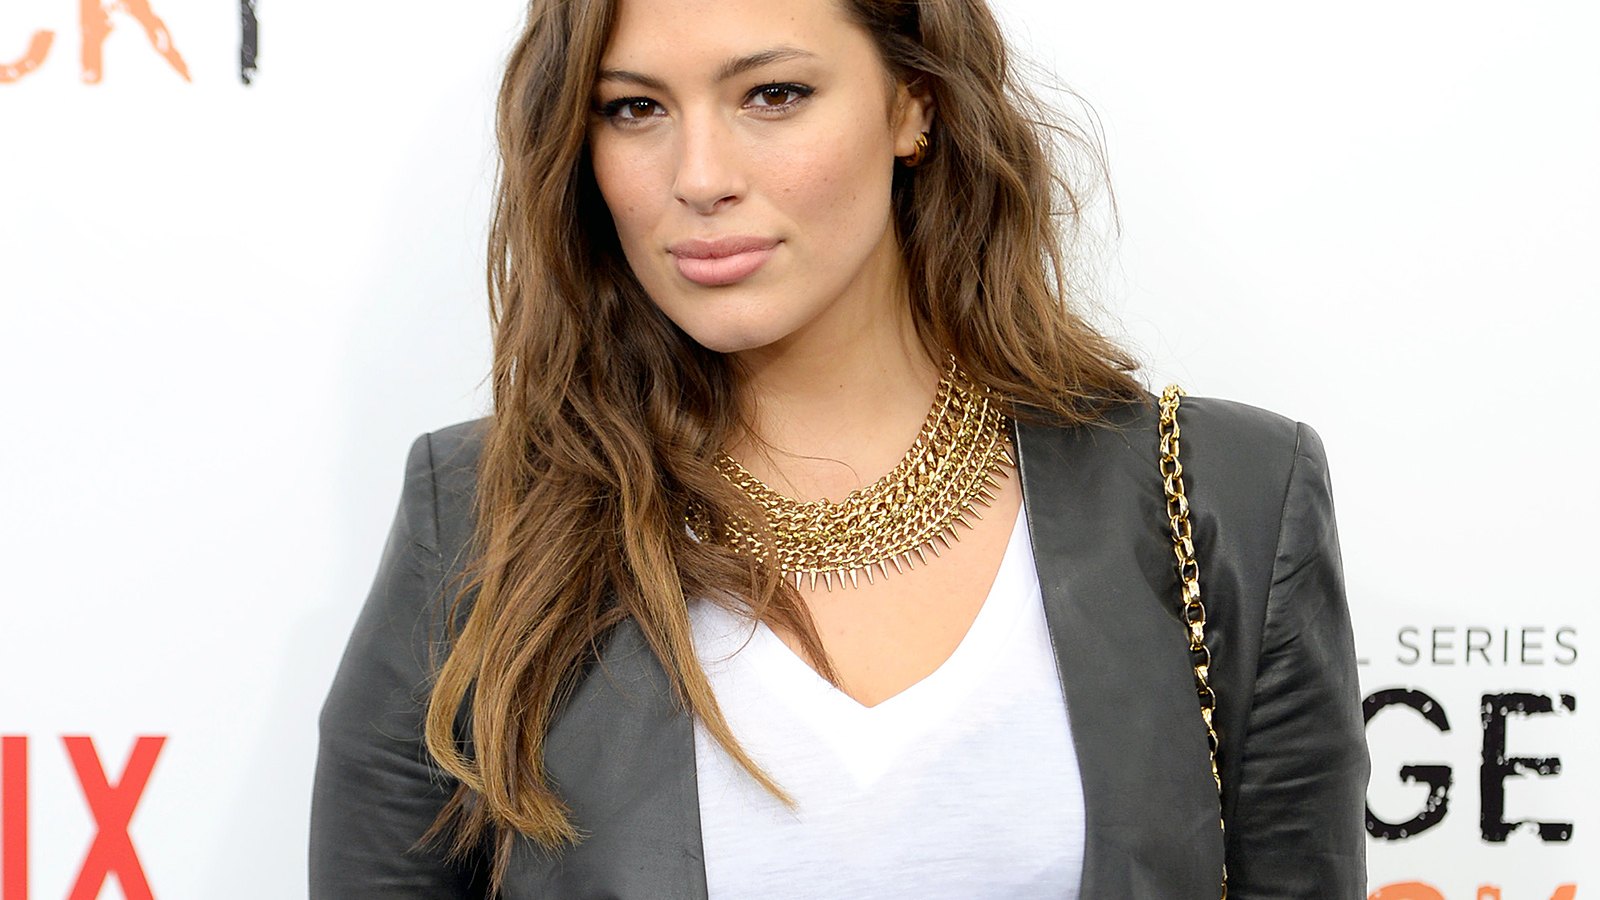 Ashley Graham at the "Orange Is The New Black" season two premiere